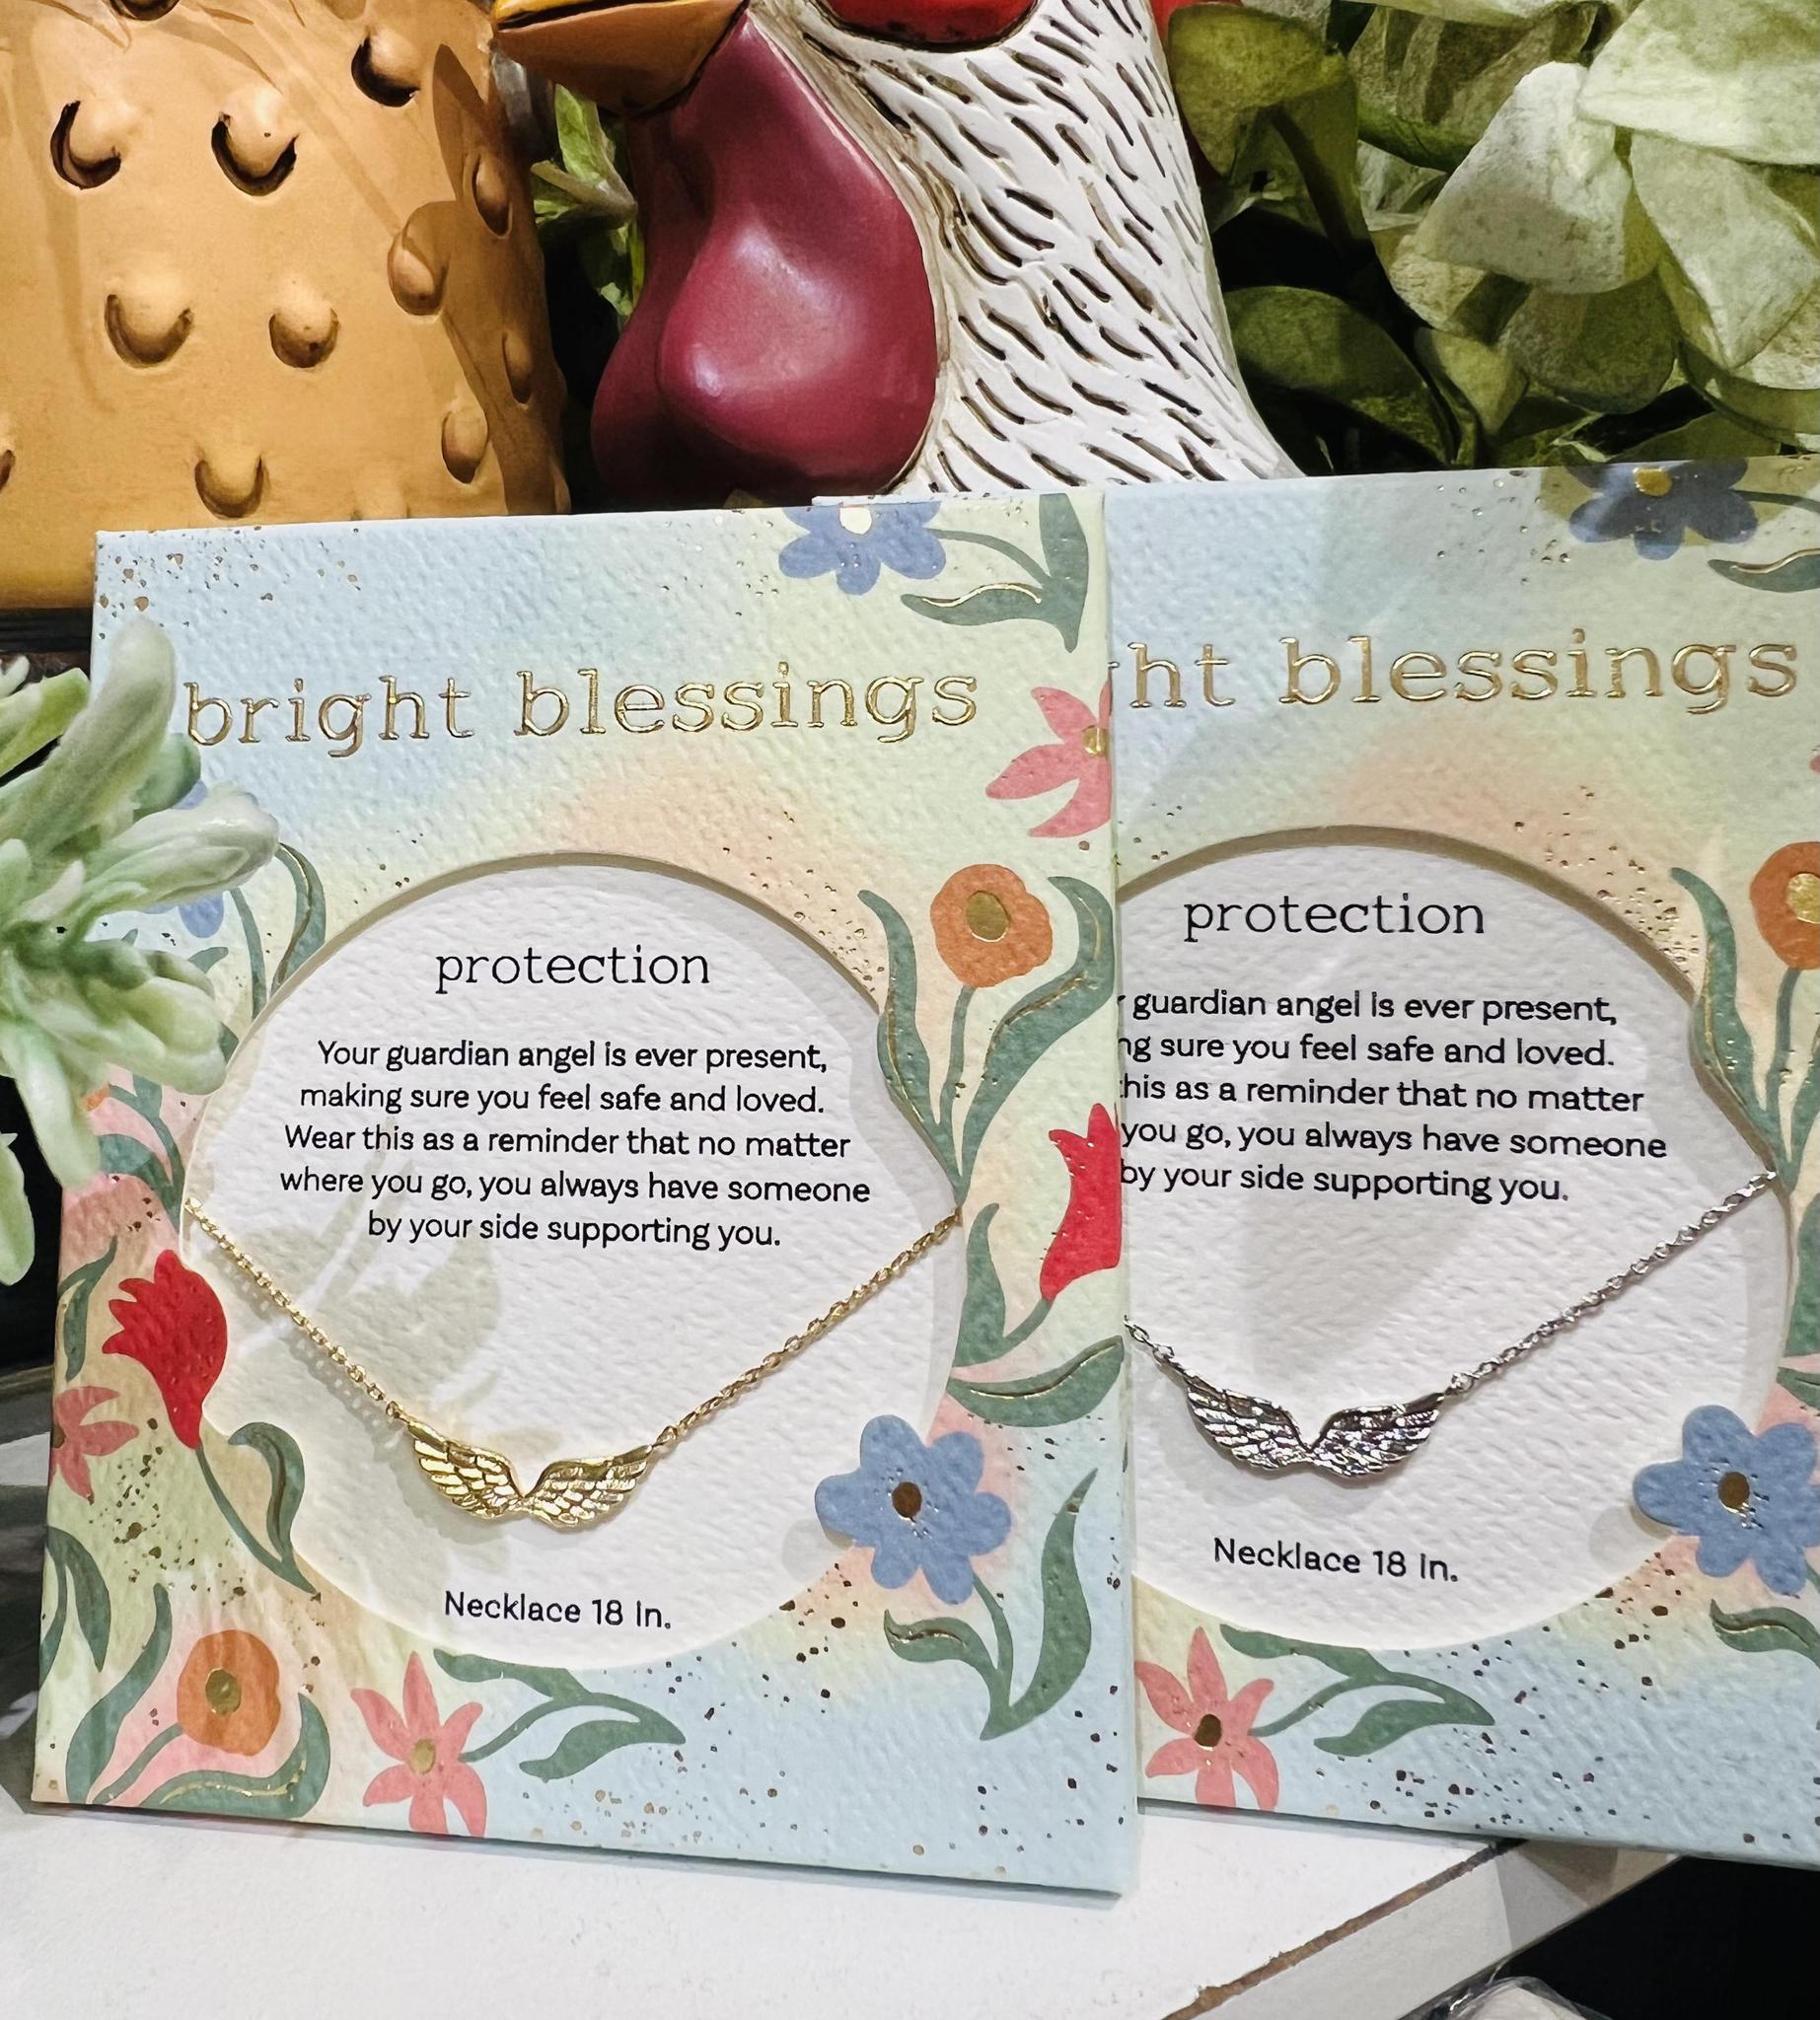 Bright Blessings Protection Necklace